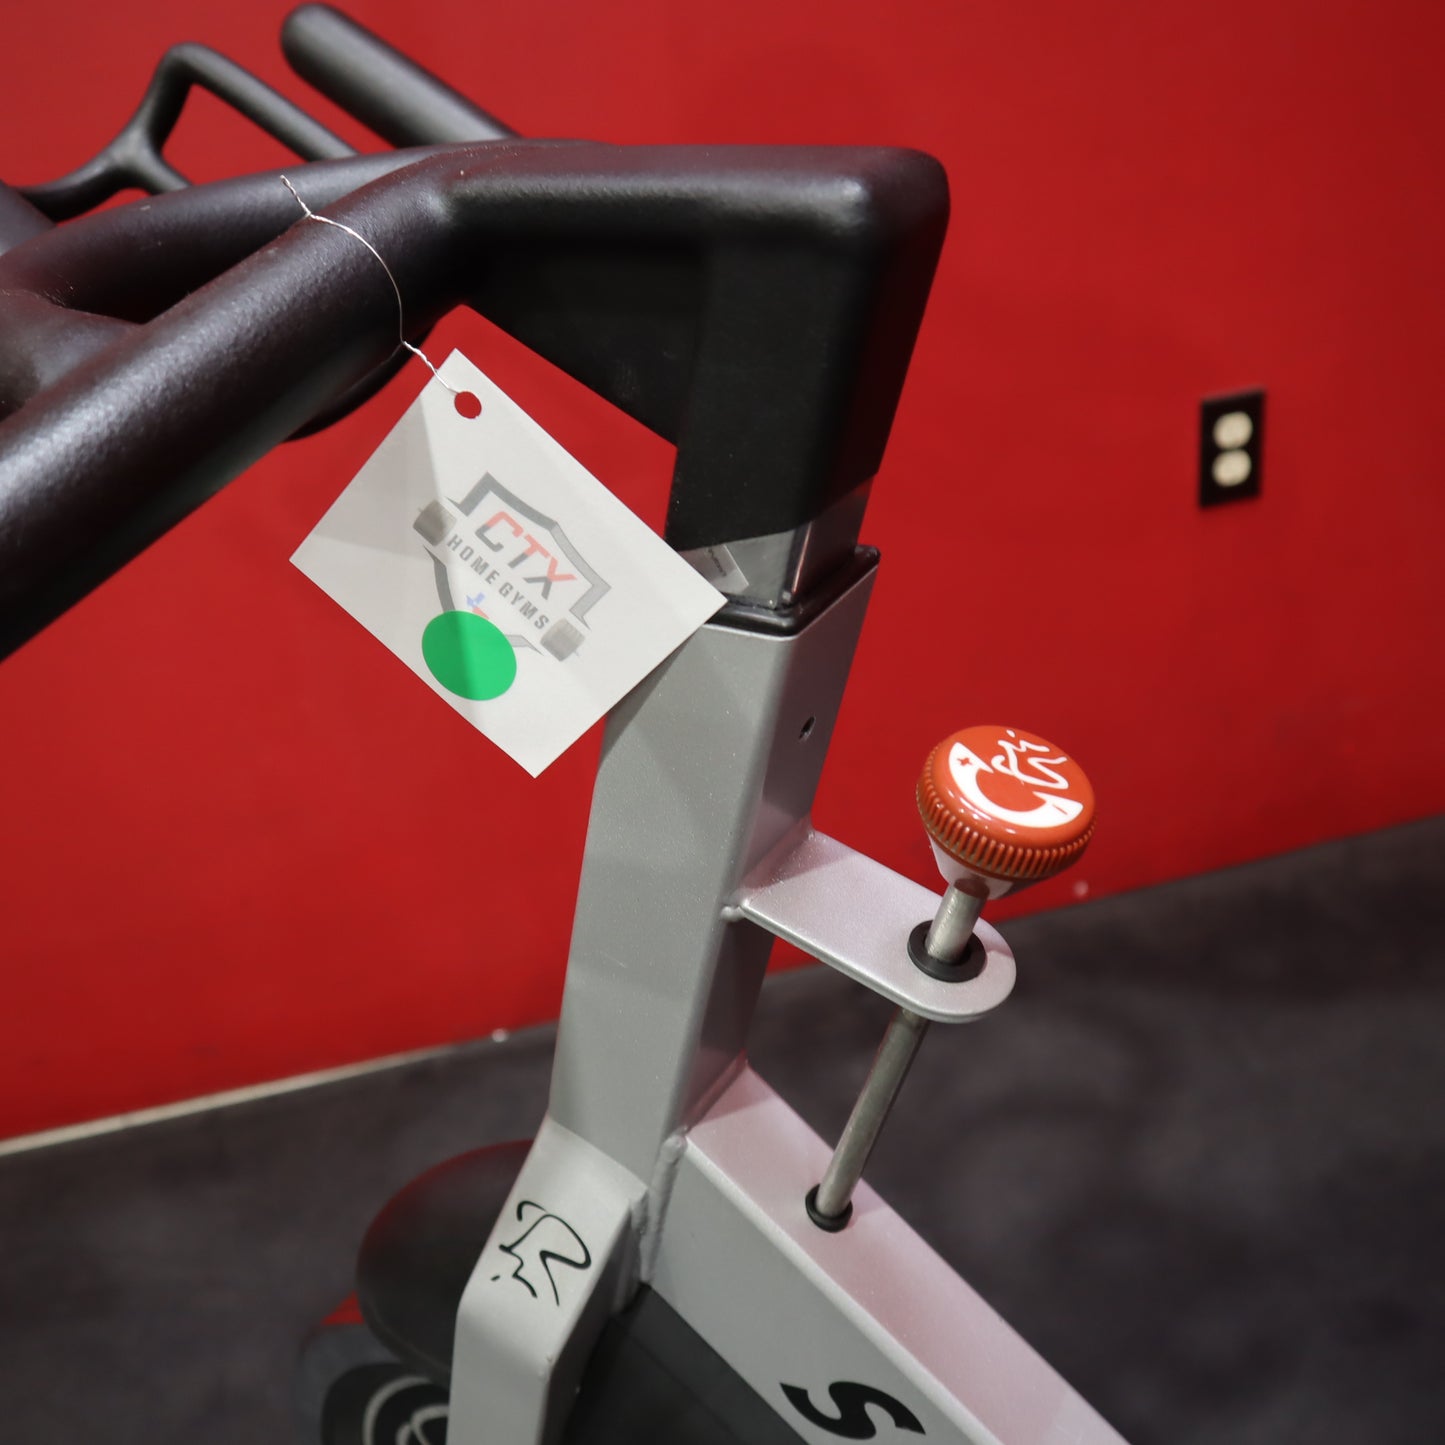 Star Trac Spinning Spinner Pro Indoor Cycle (Used)